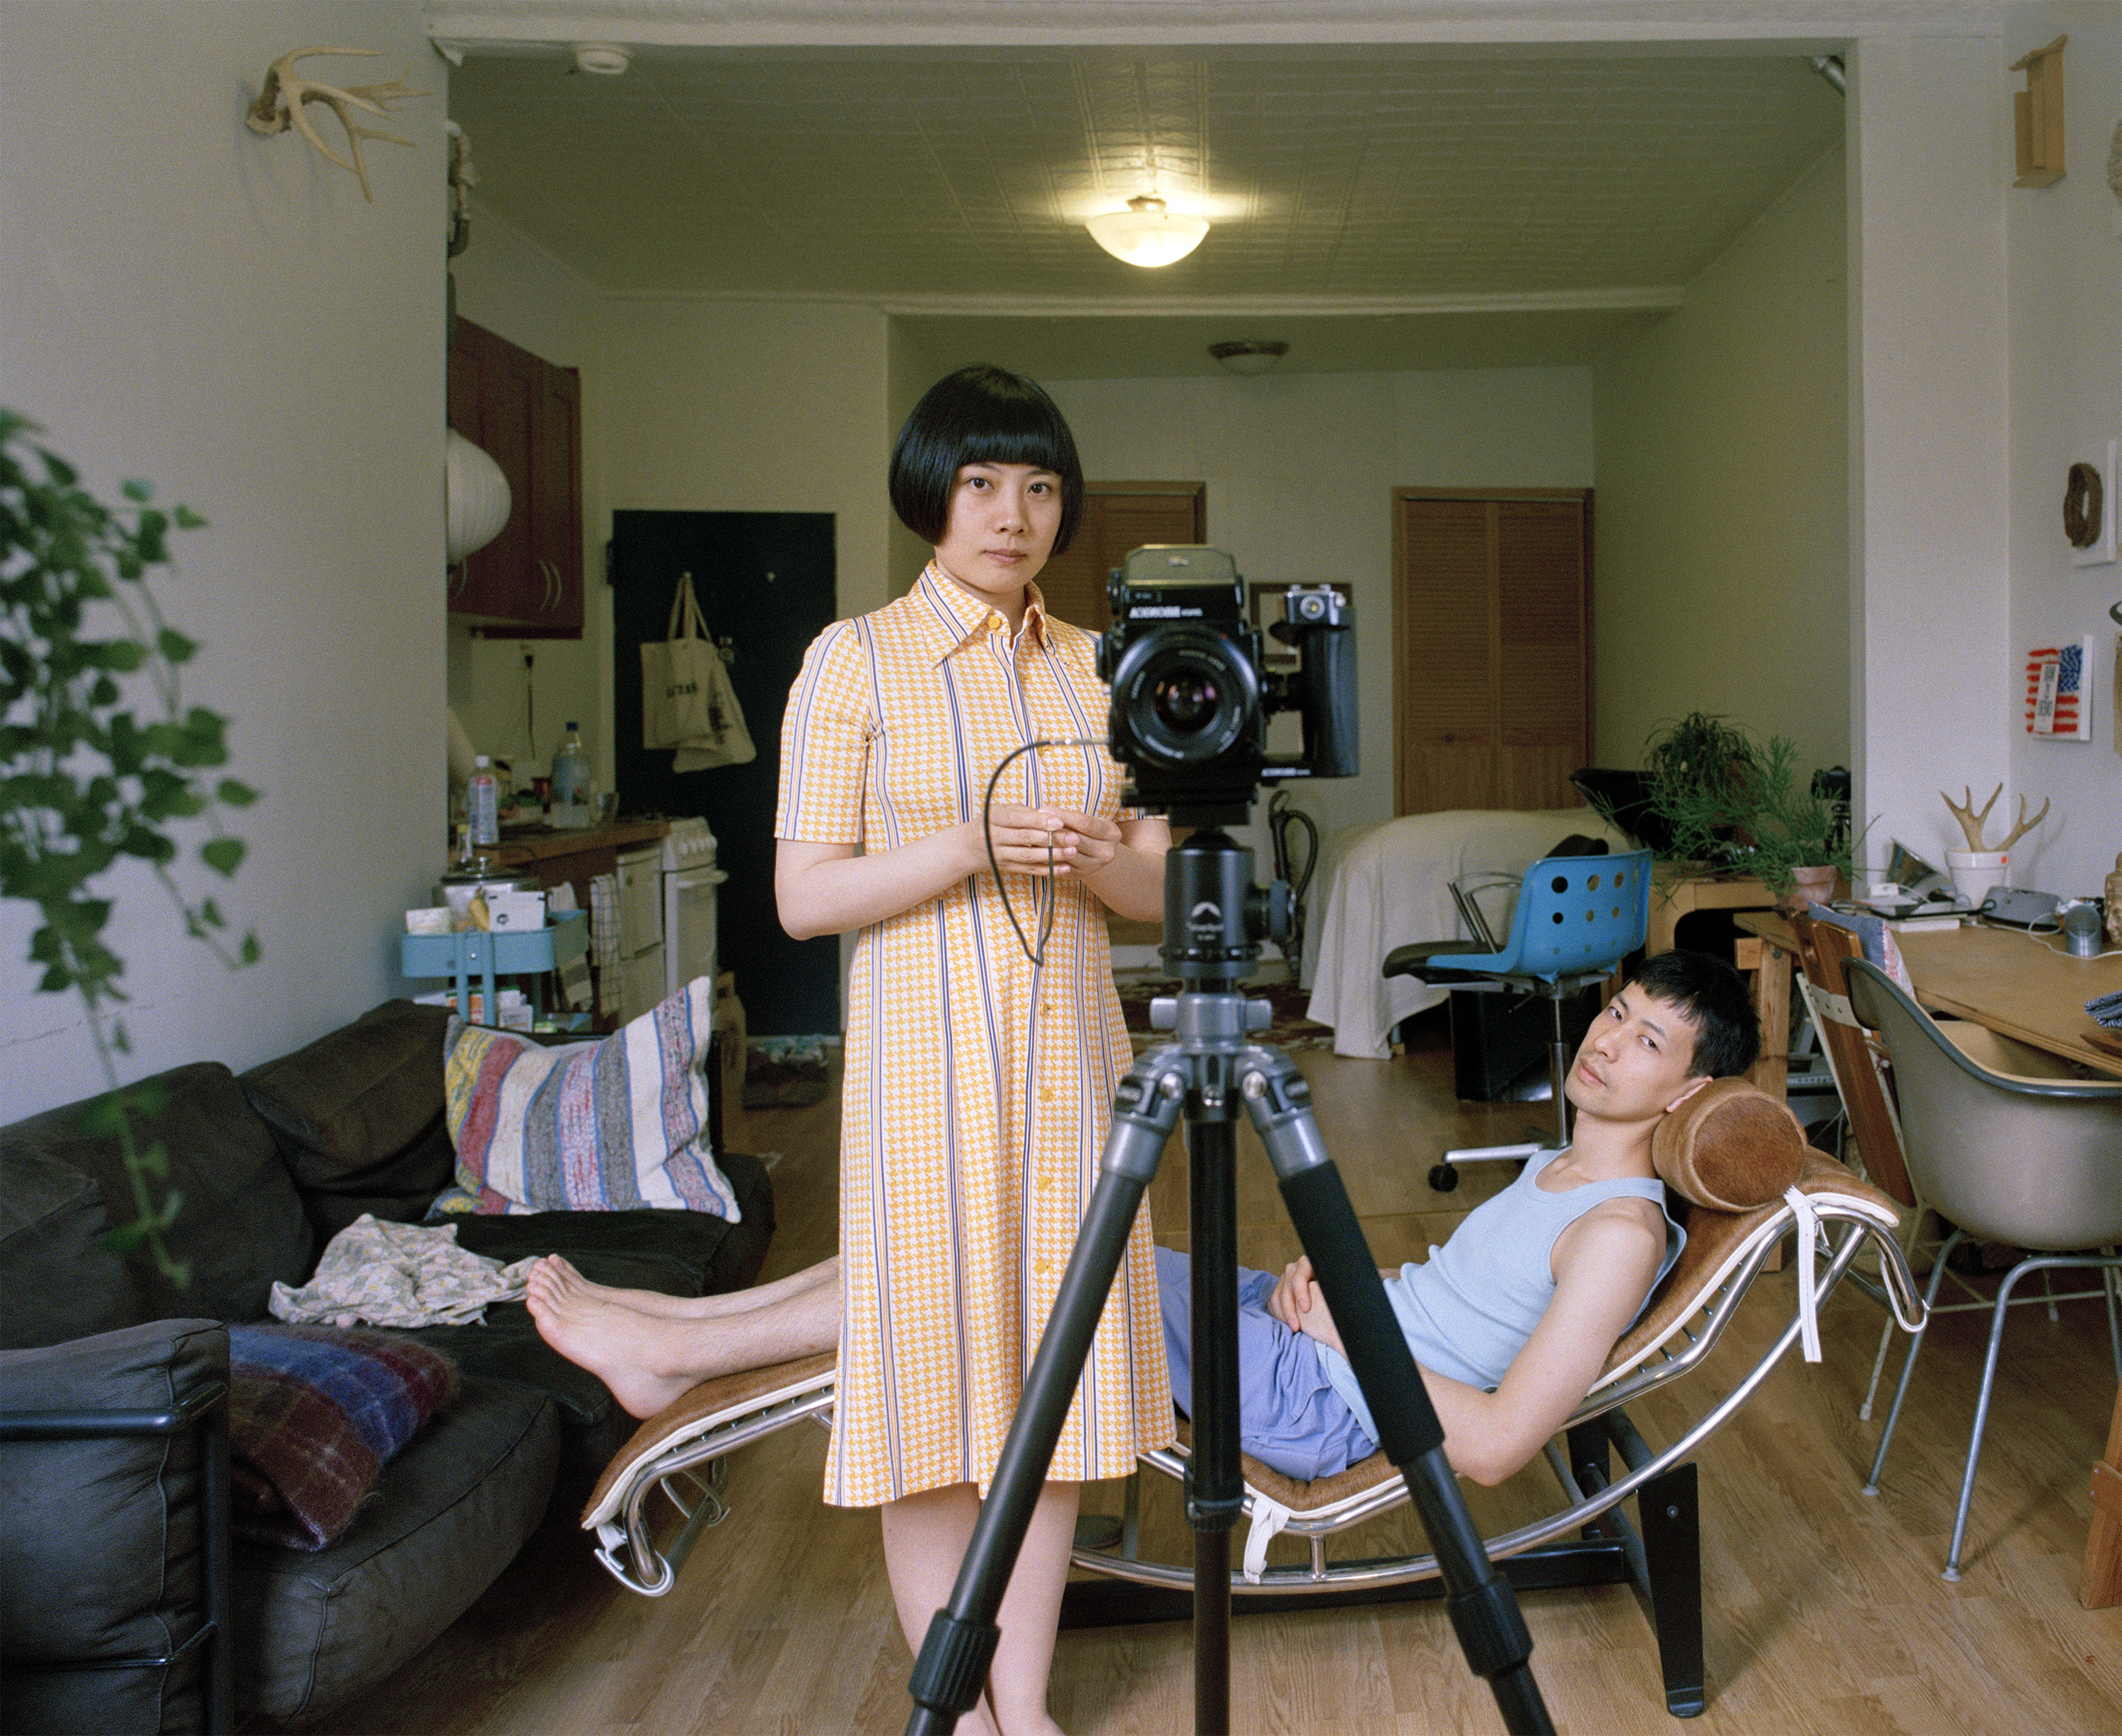 Pixy Liao, a Chinese woman with a dark bob wears a yellow dress and stands between a tripod and Moro, reclining in a chair